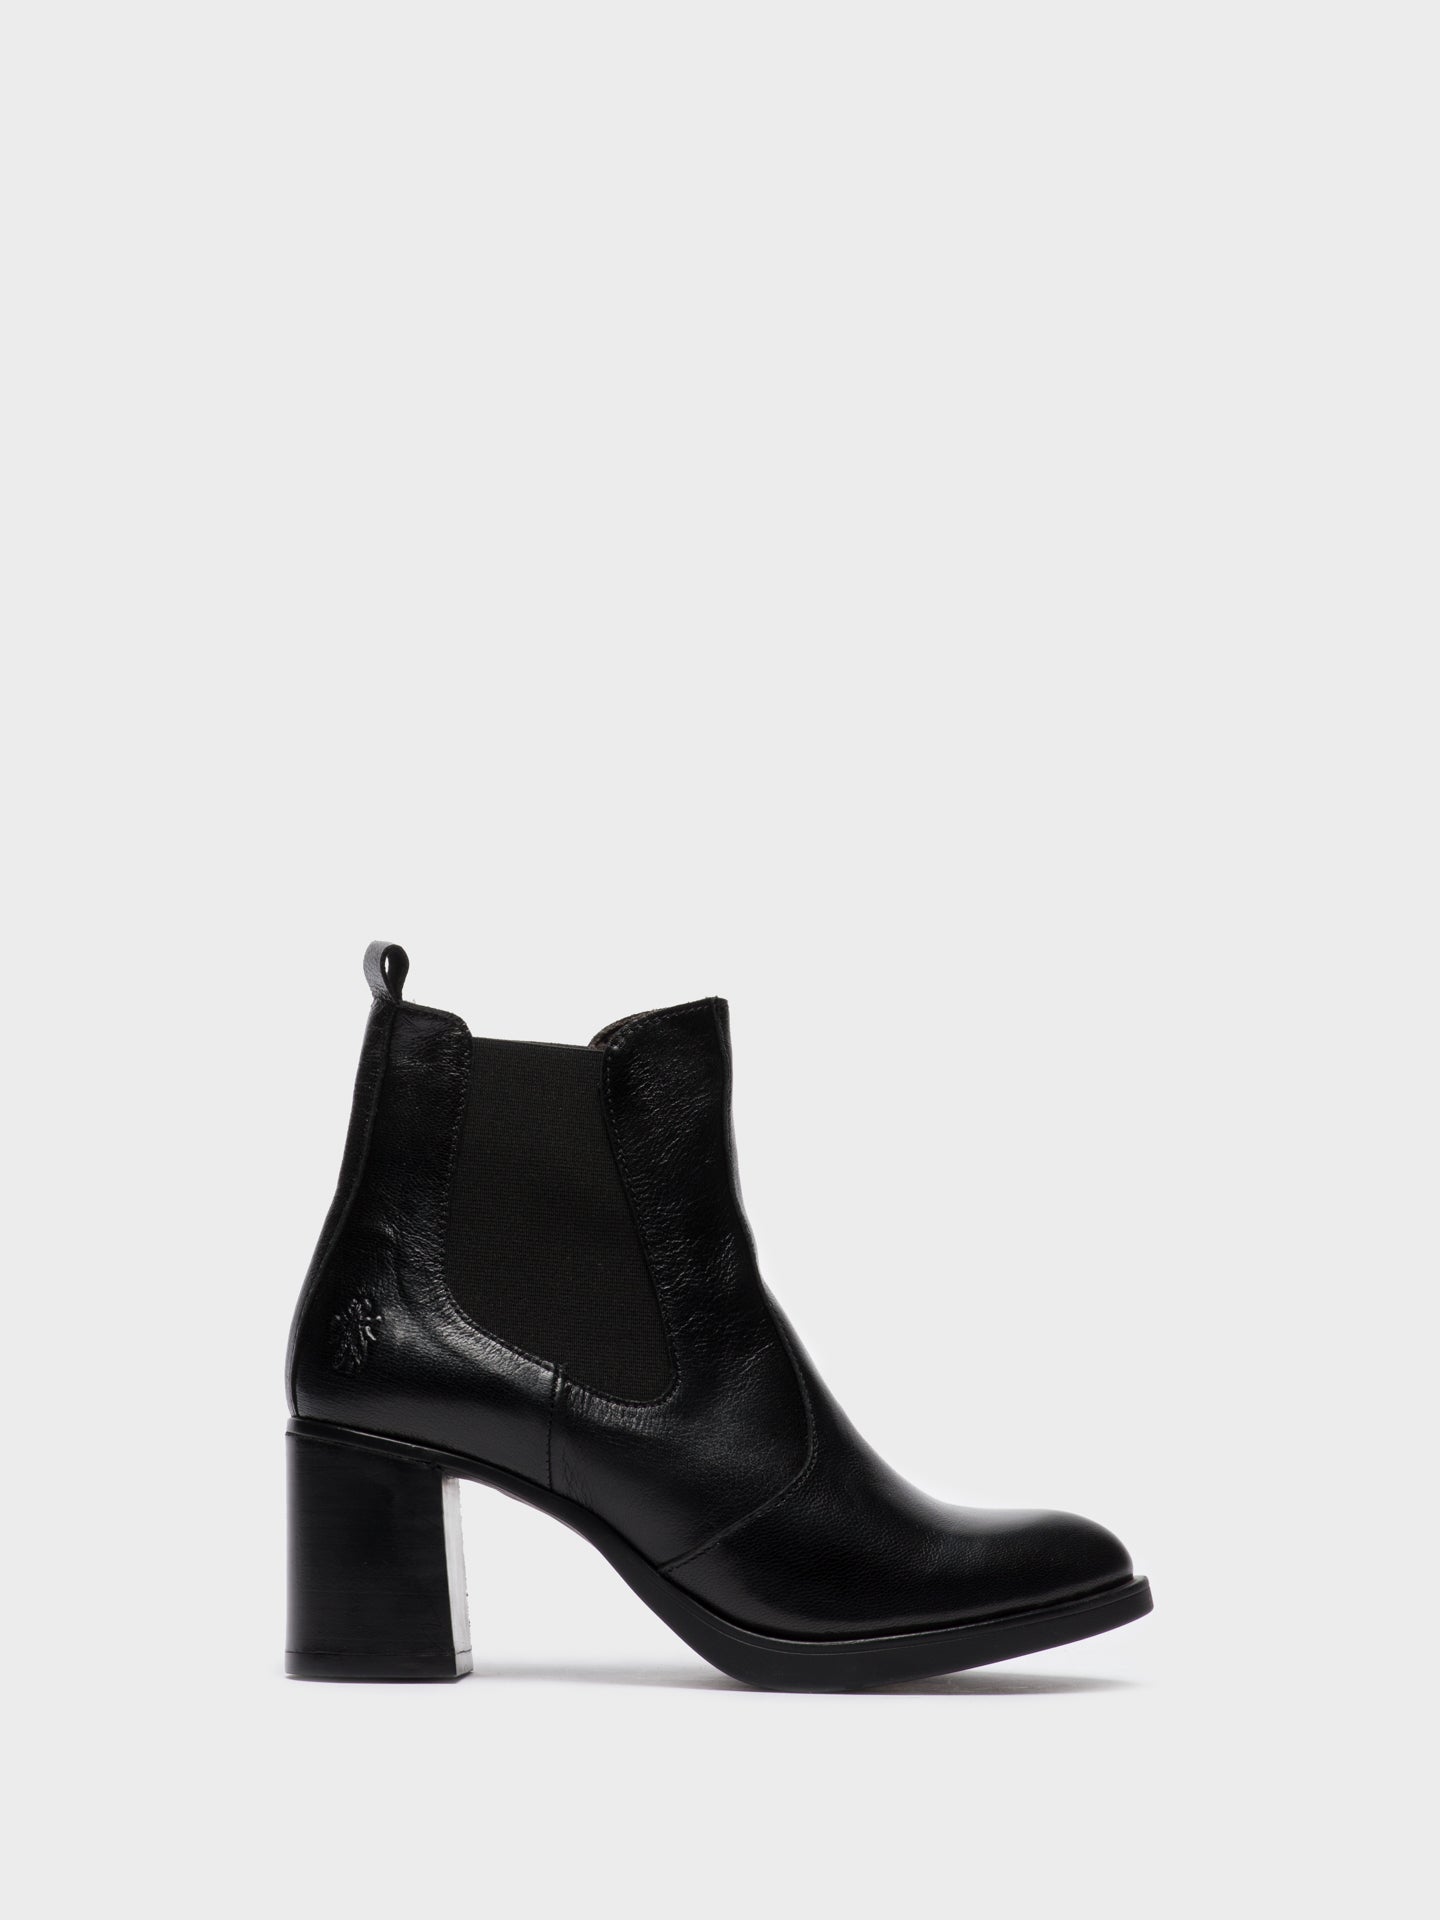 Fly London Coal Black Chelsea Ankle Boots